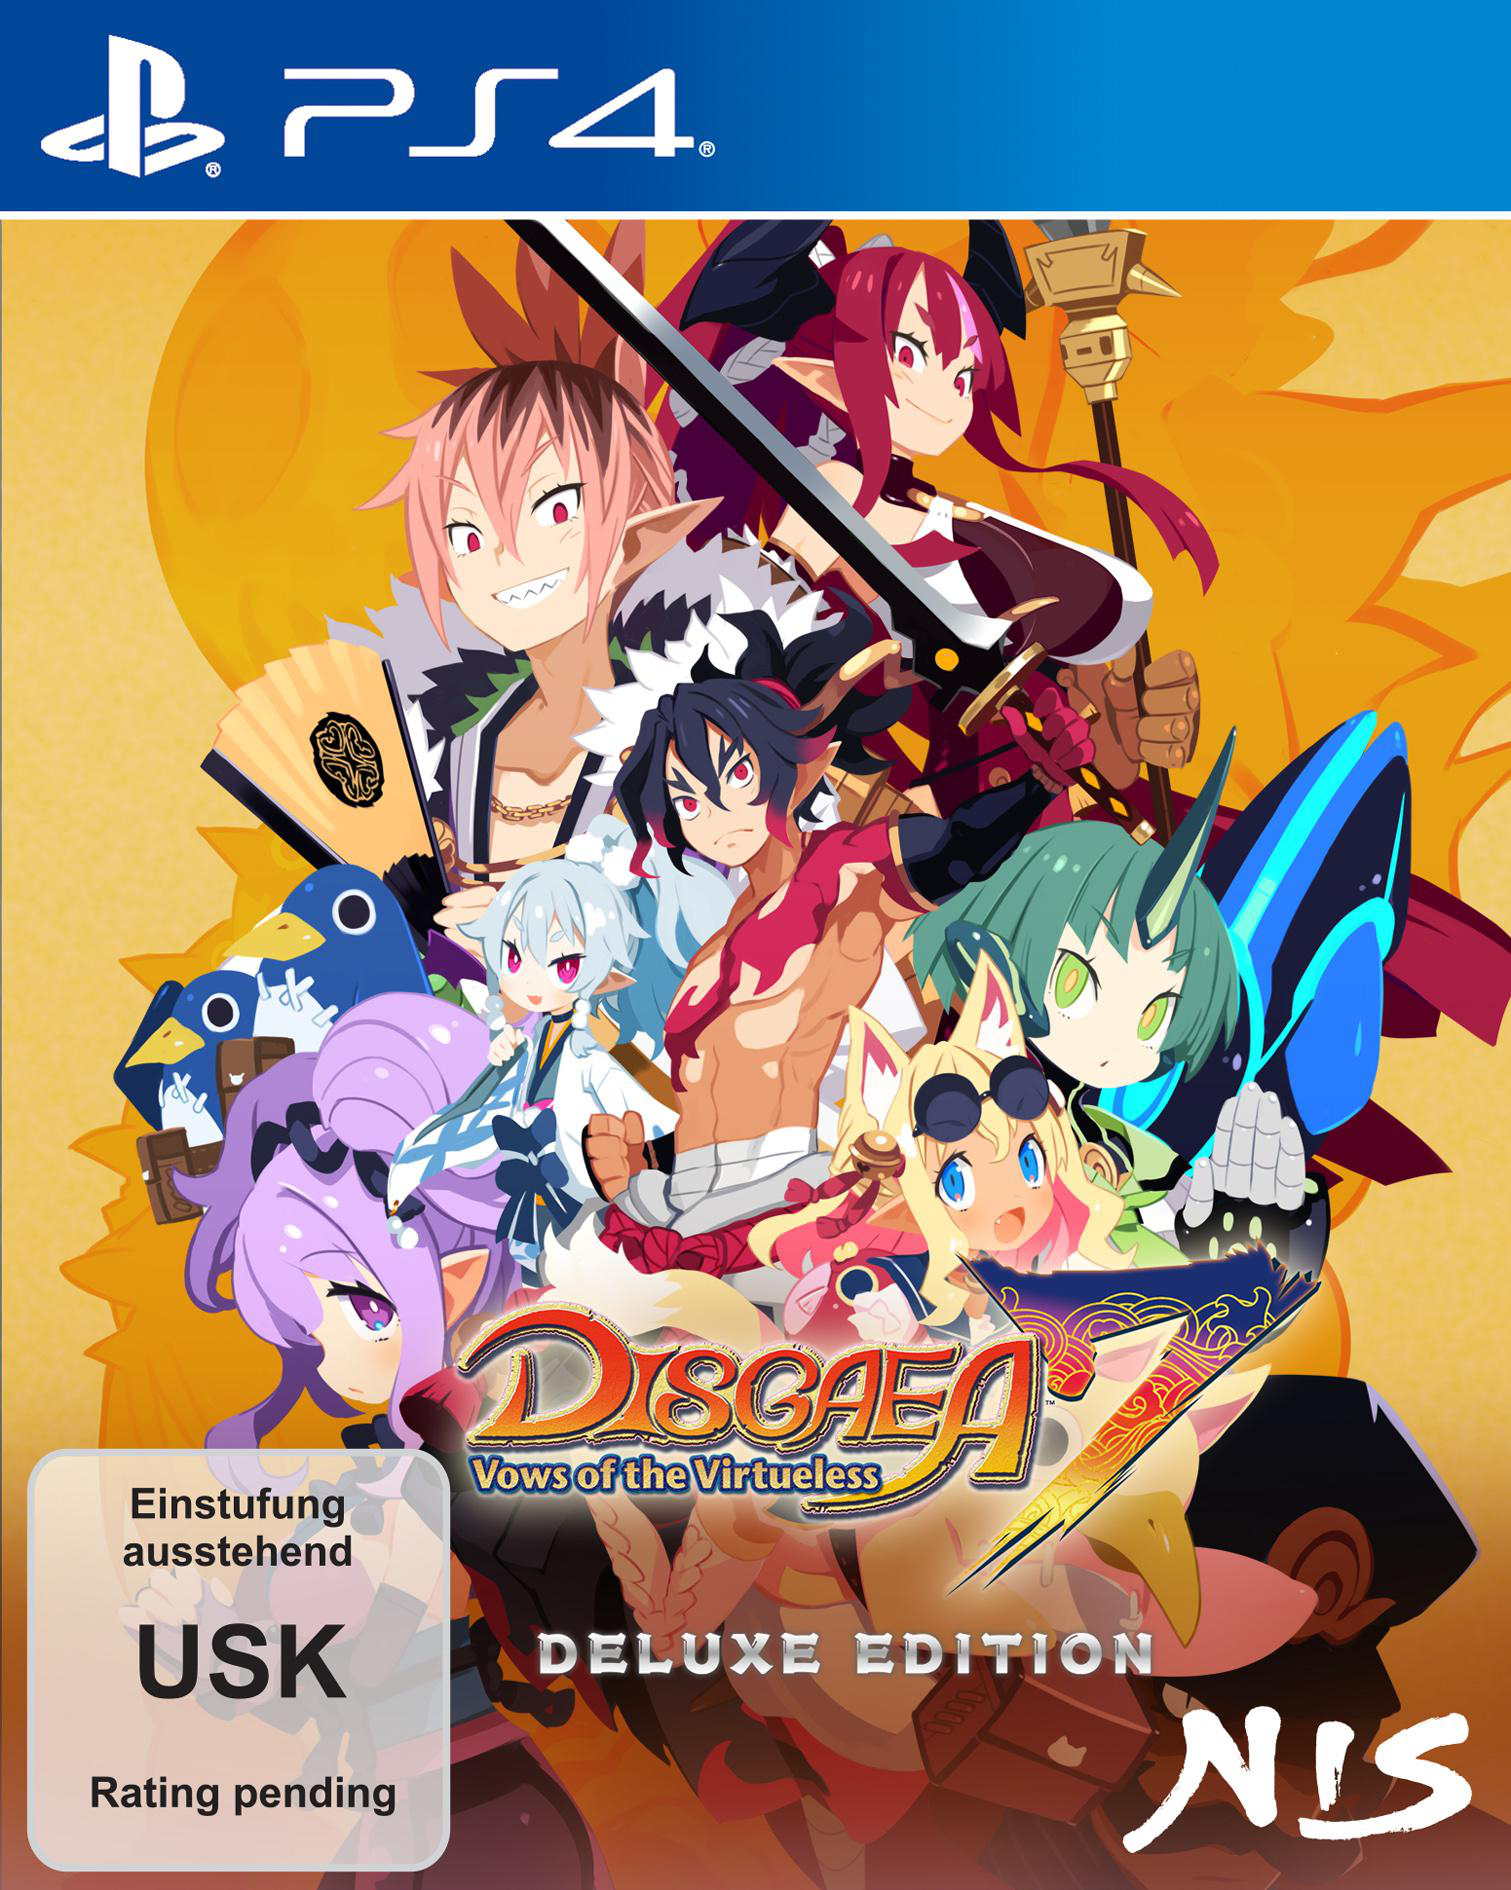 of Deluxe Vows - 4] Disgaea [PlayStation 7: - the Edition Virtueless